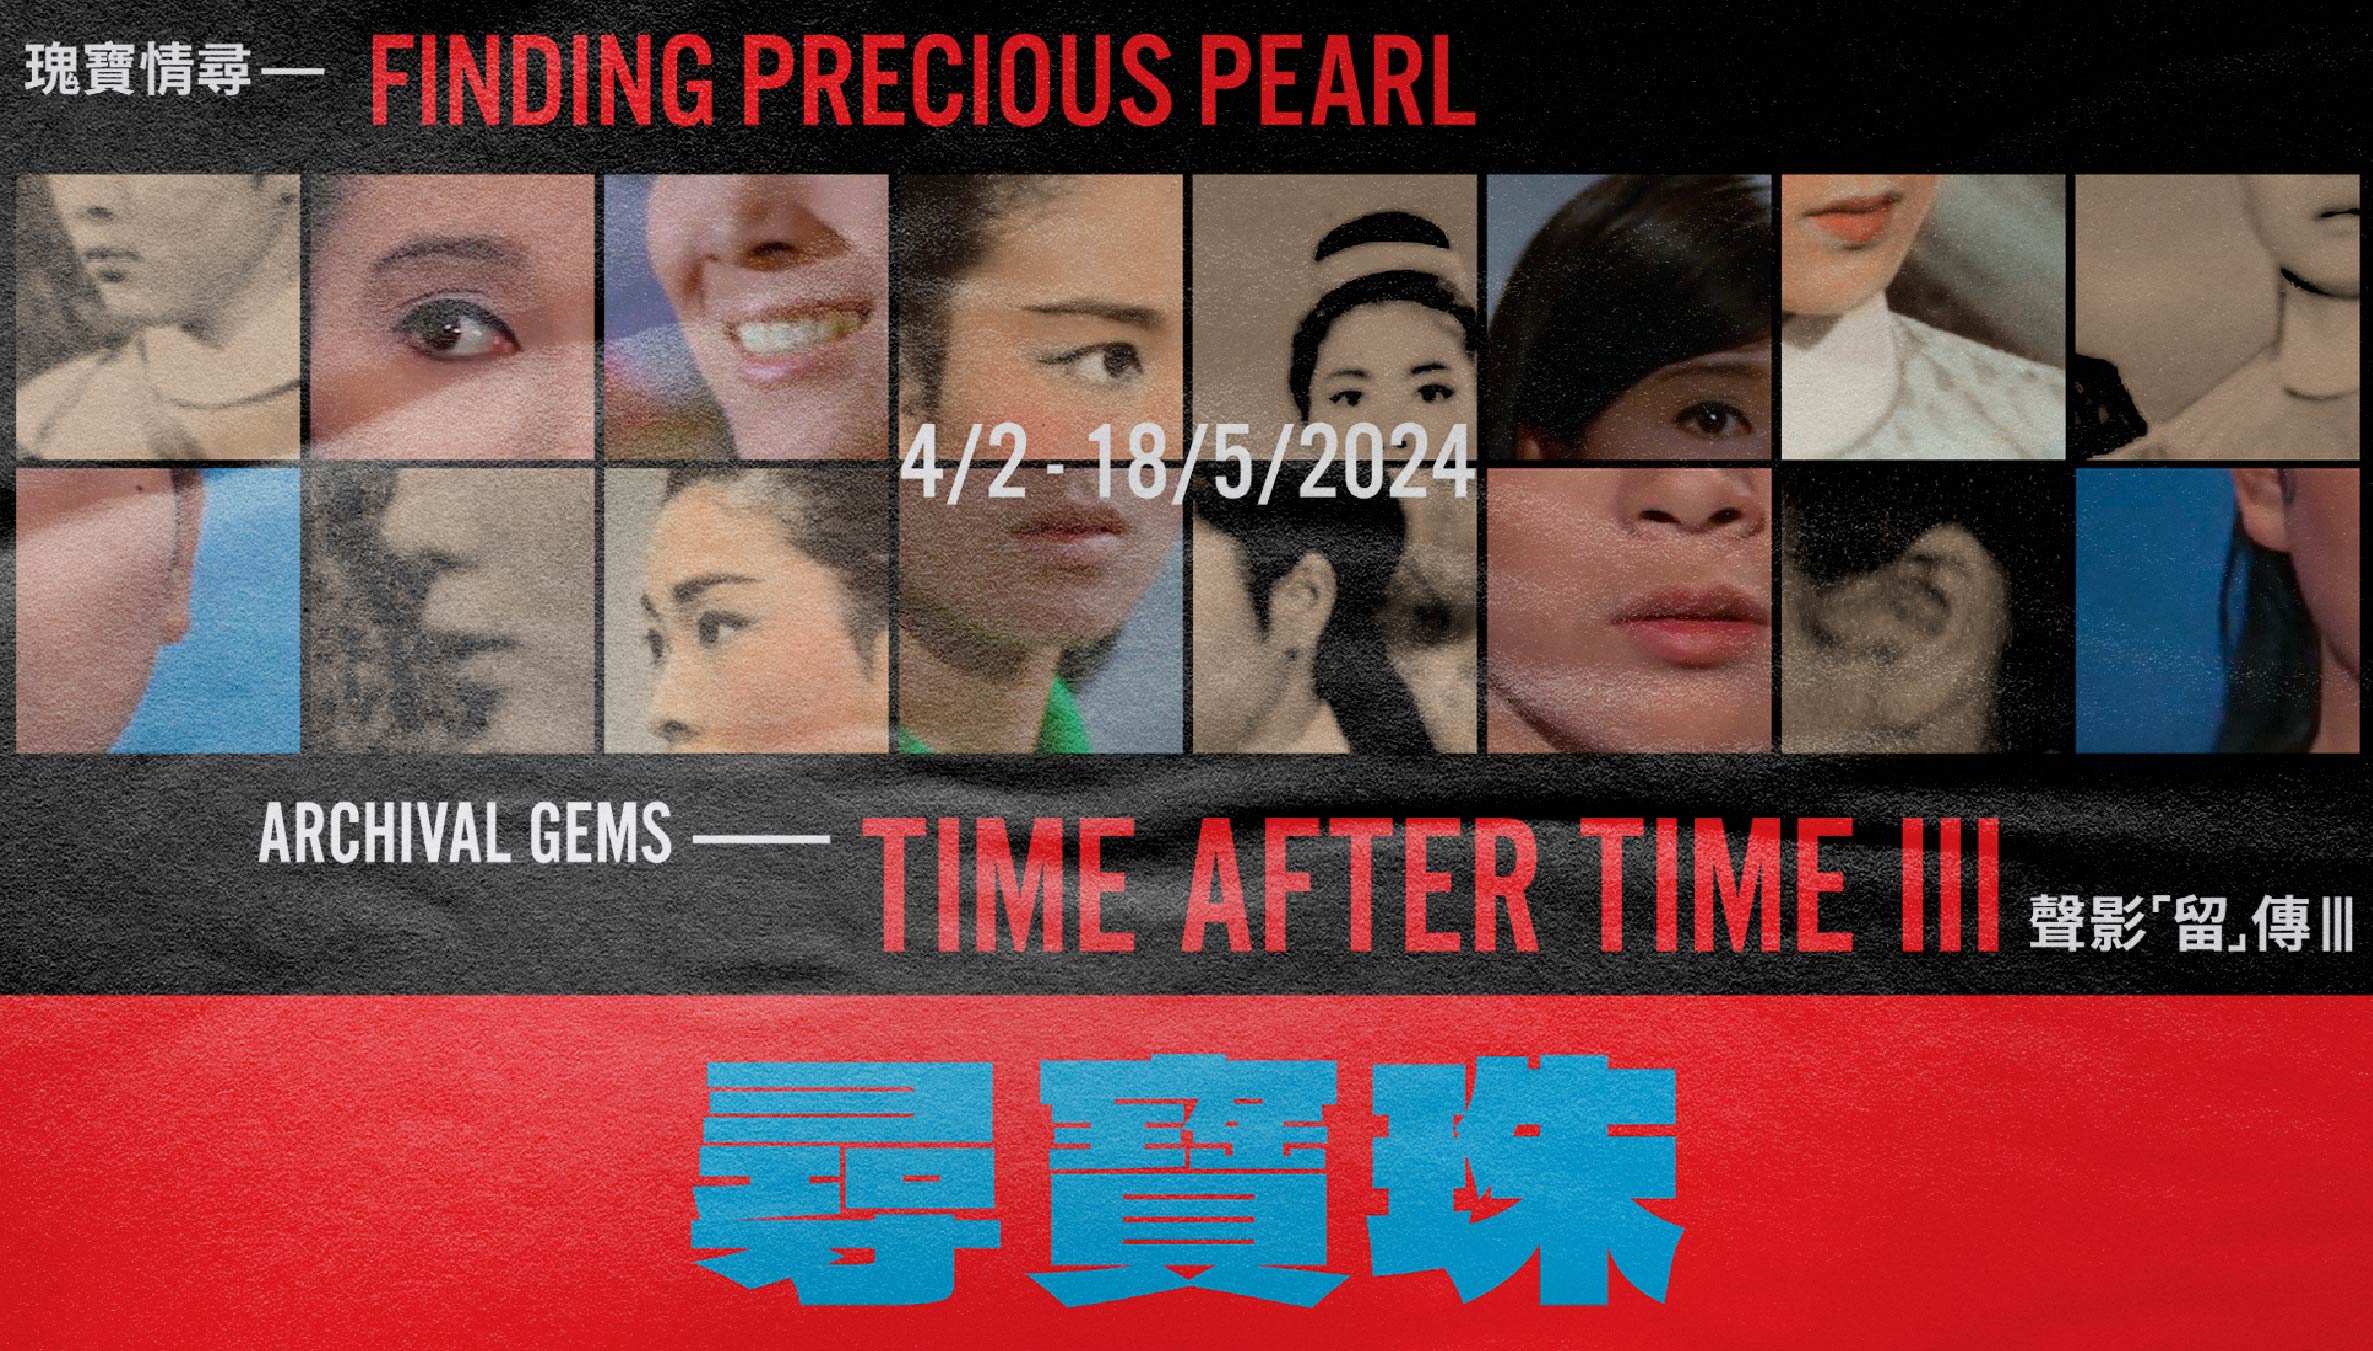 Archival Gems – Time After Time III Finding Precious Pearl (4/2/2024-22/6/2024)